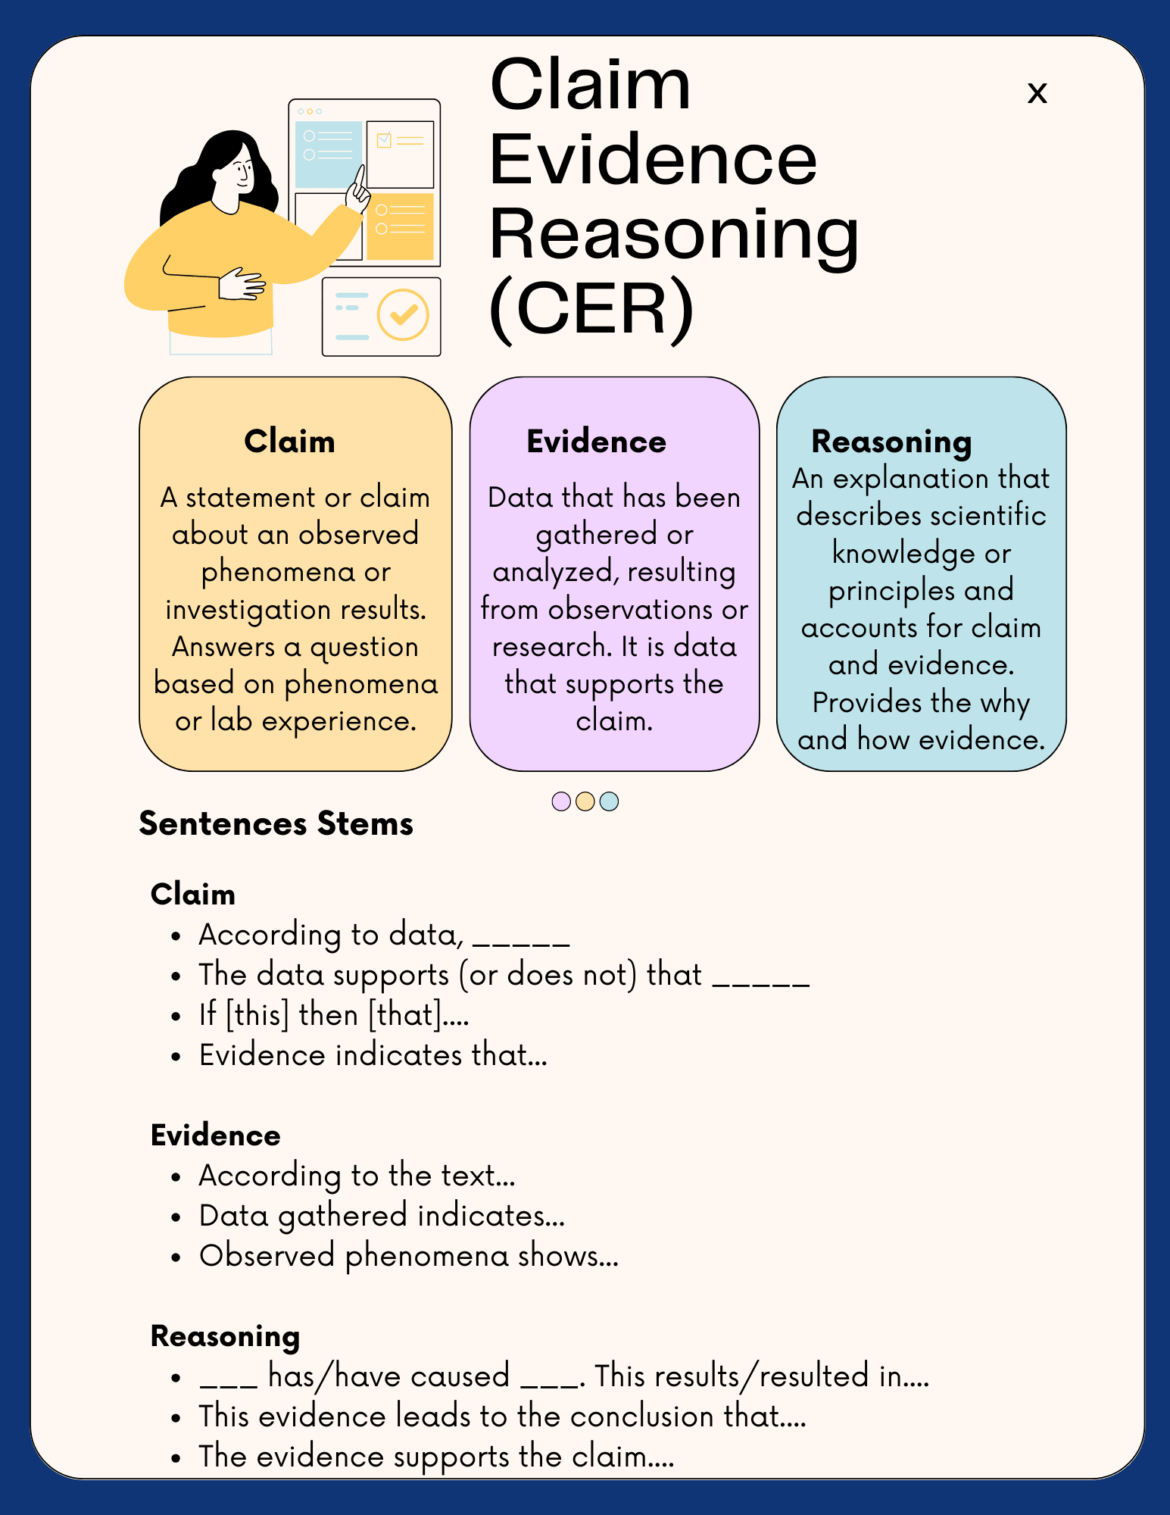 cer-resources-for-the-science-classroom-technotes-blog